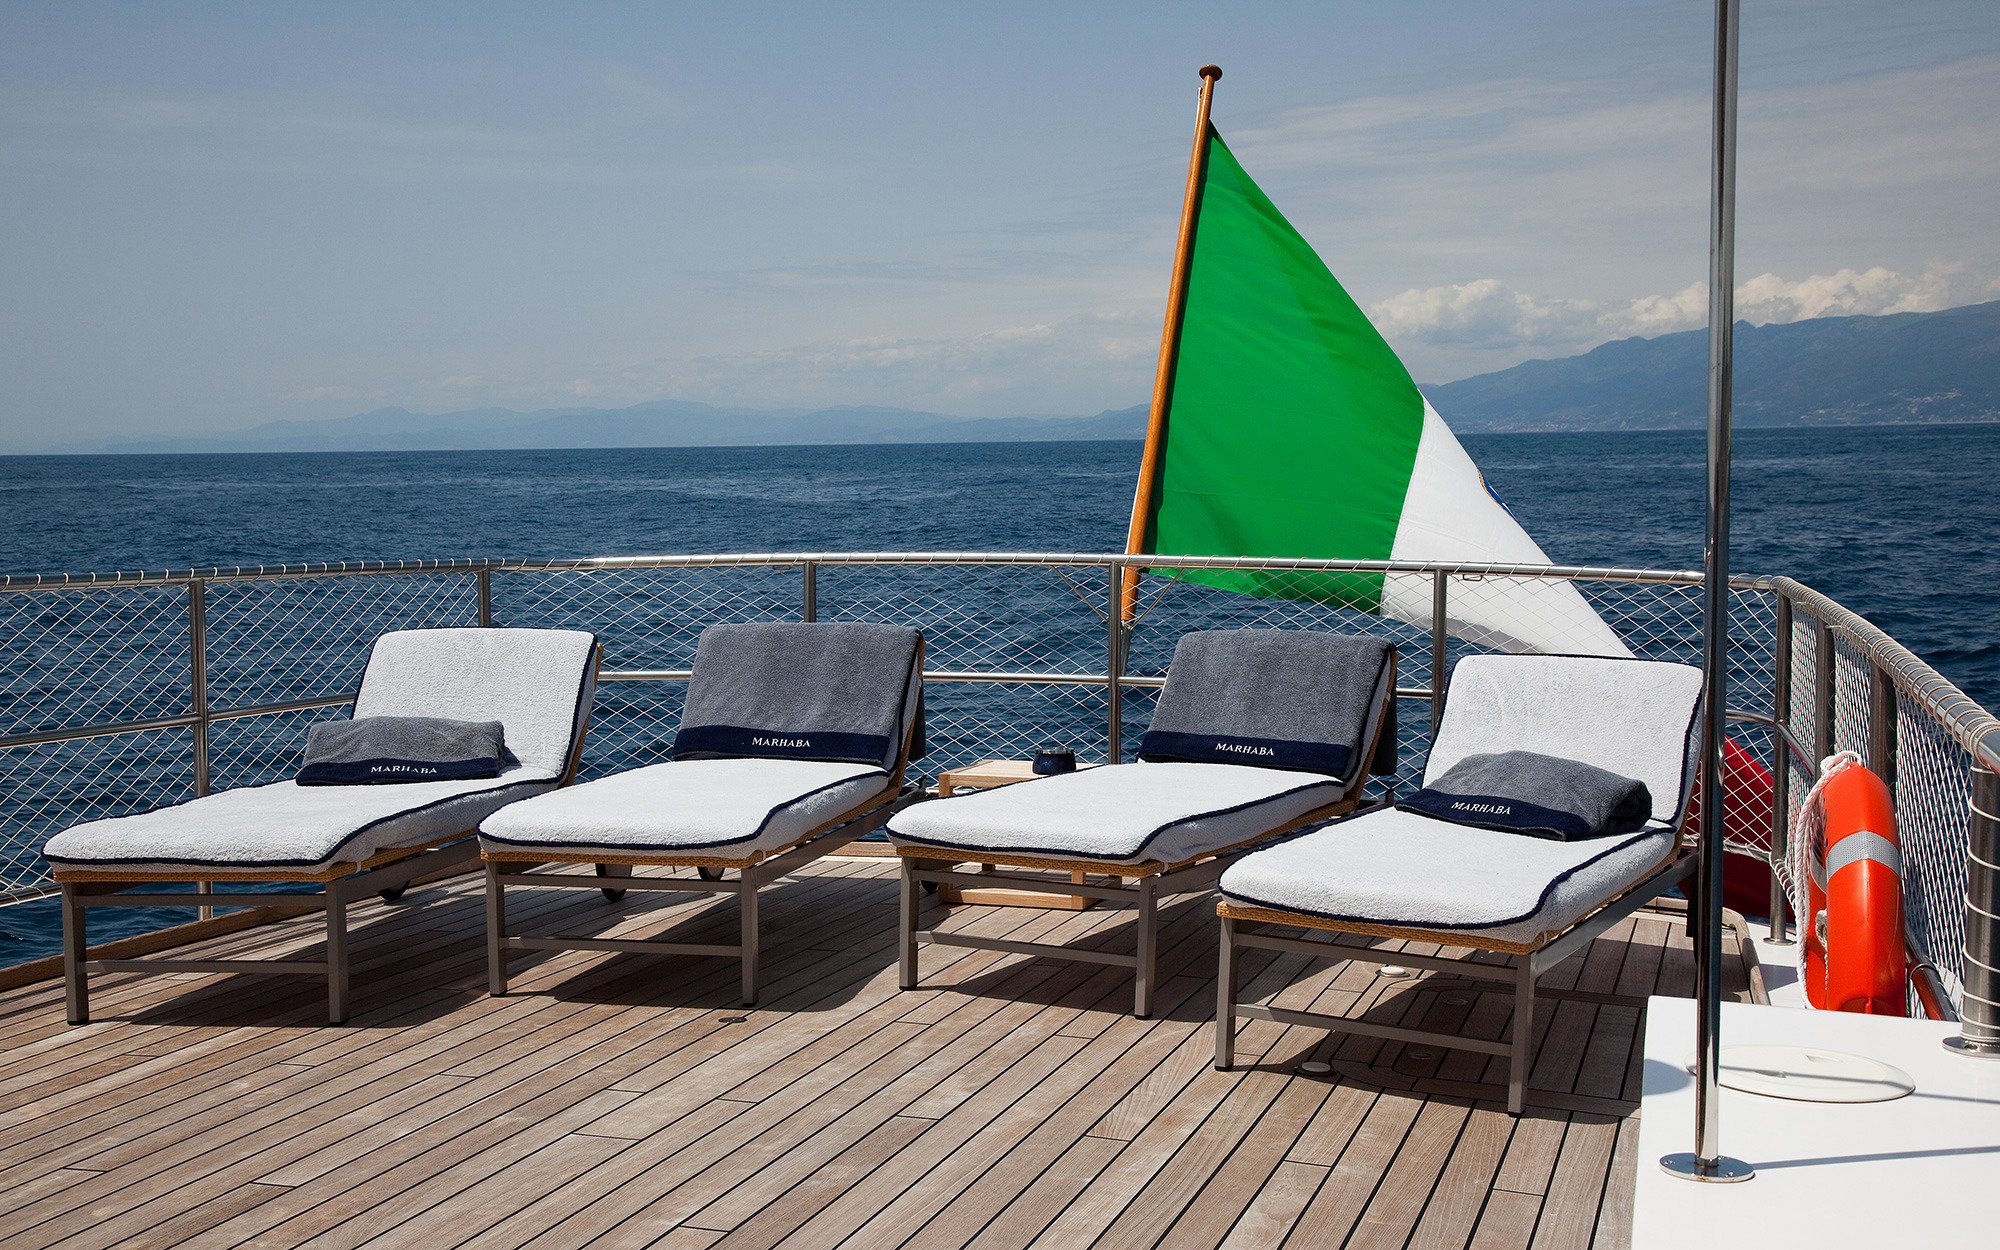 Upper Deck Chaise Loungers